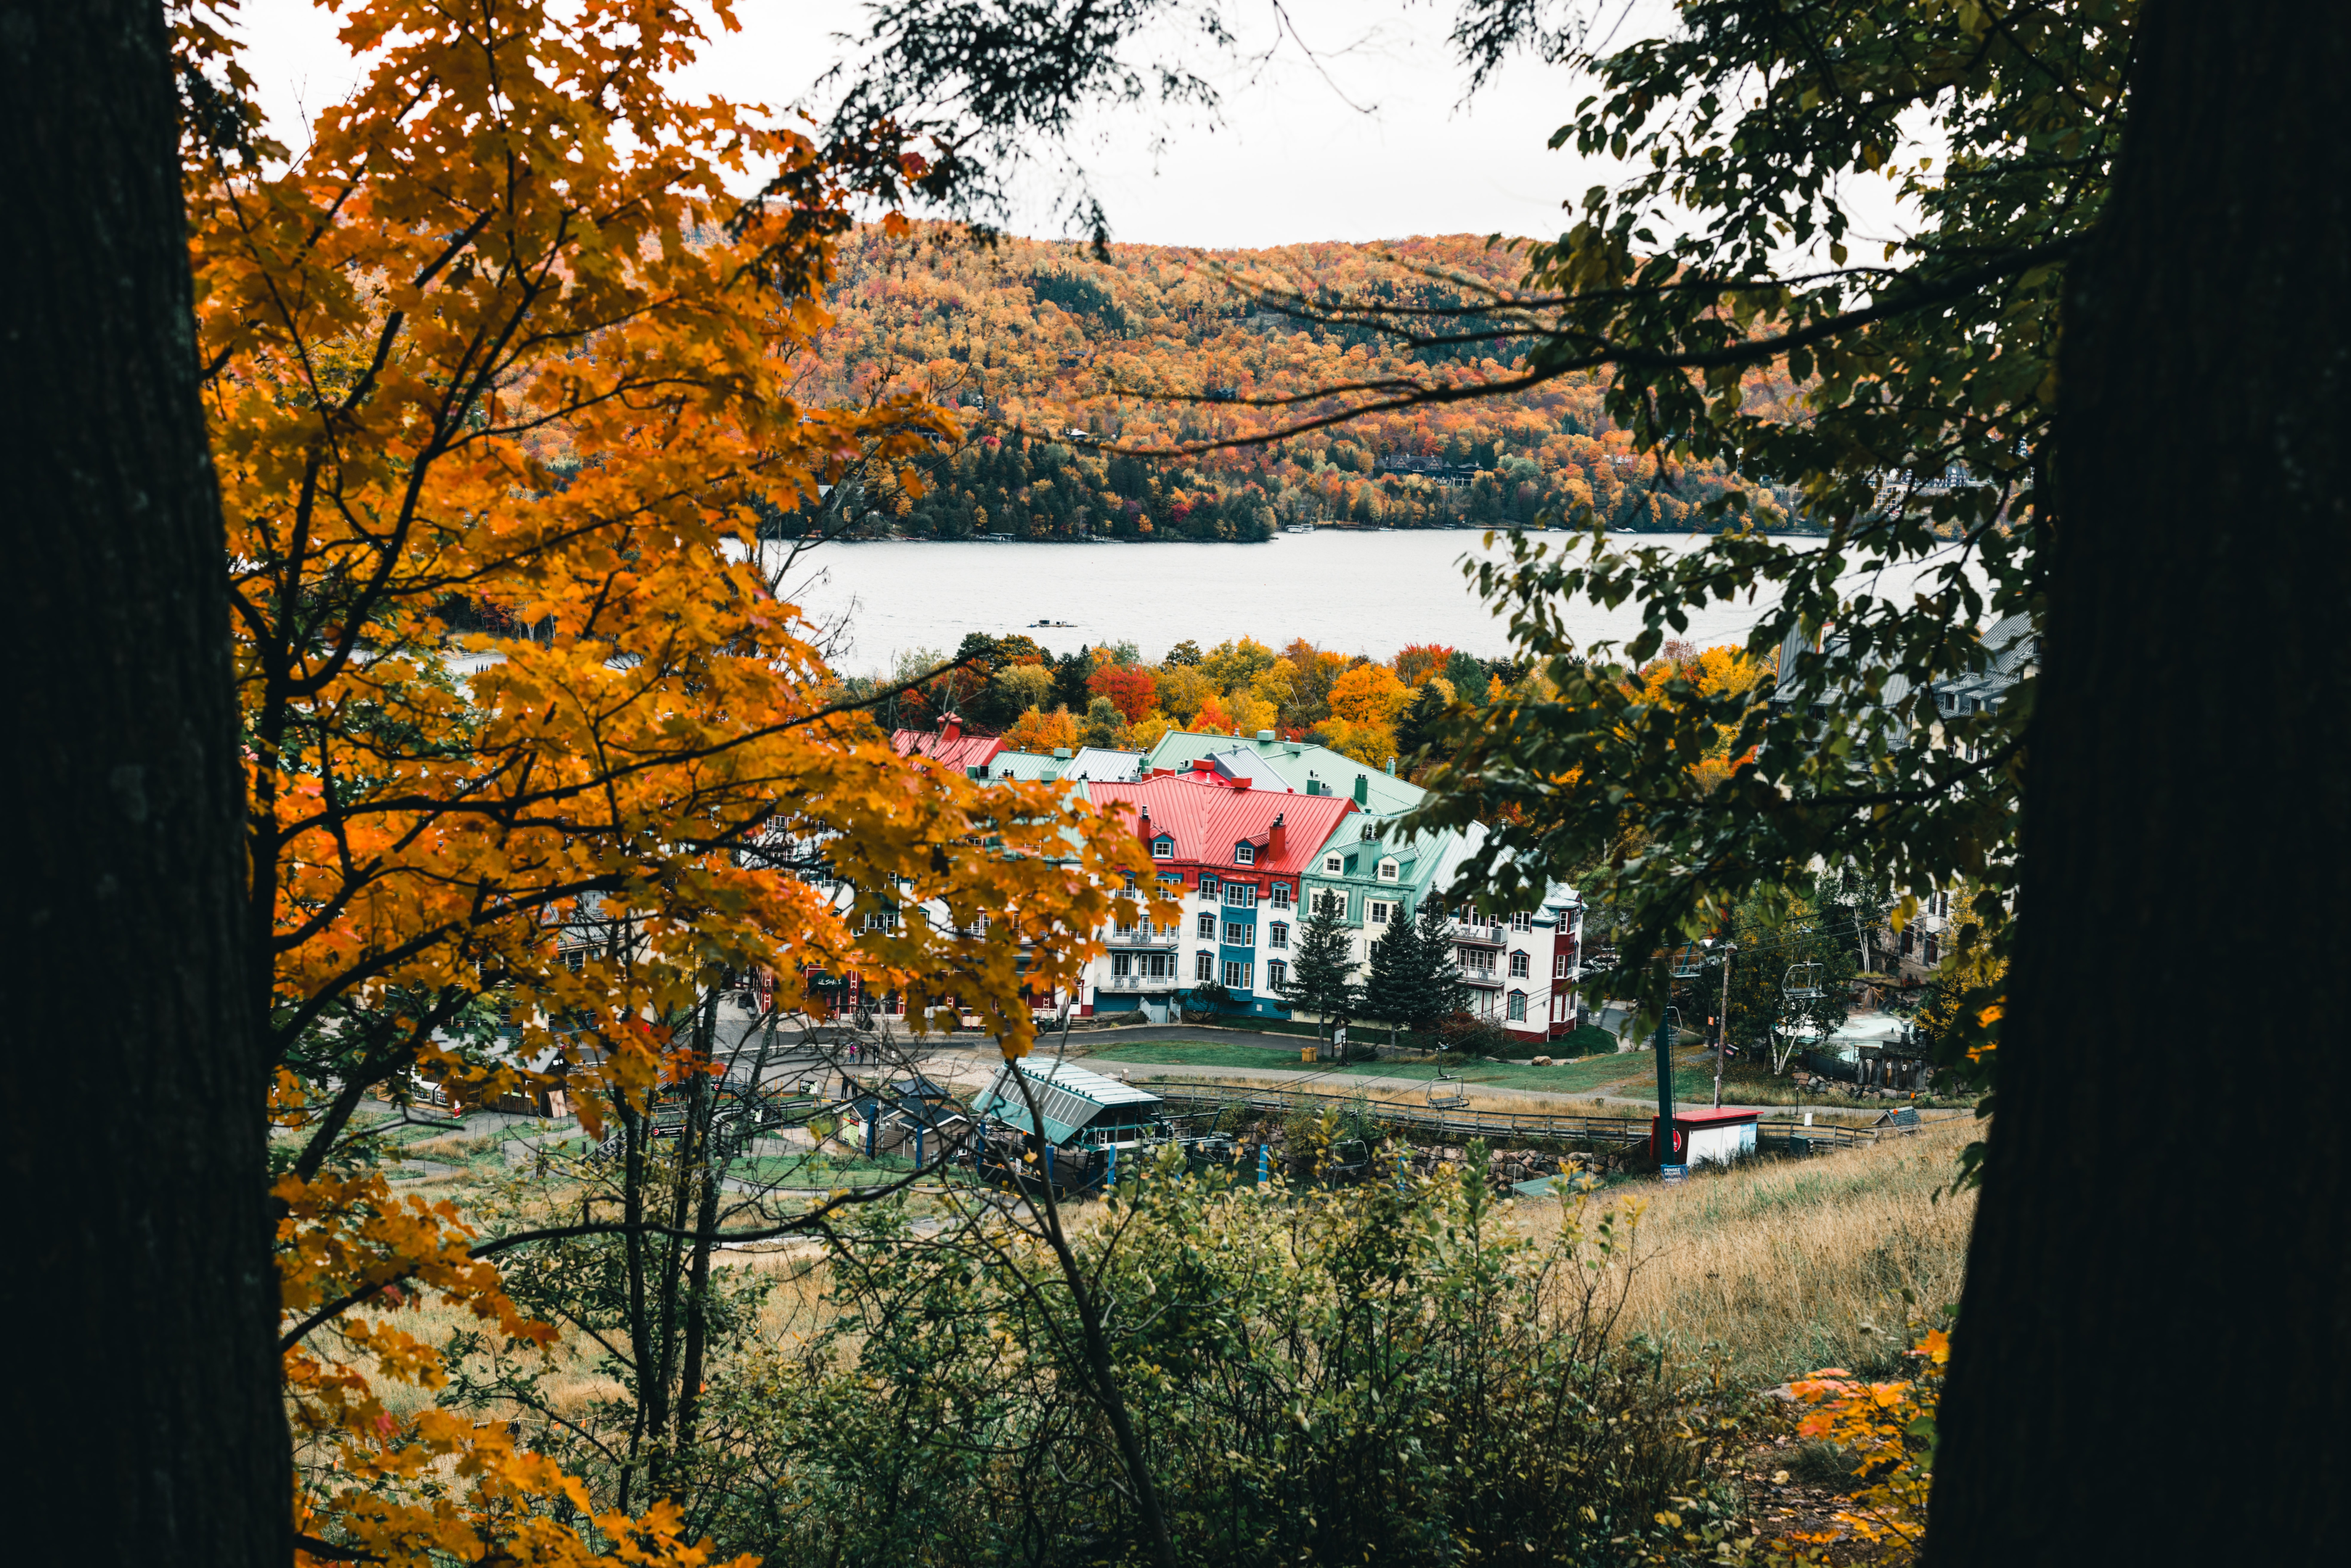 Mont-Tremblant is a kid friendly national parks